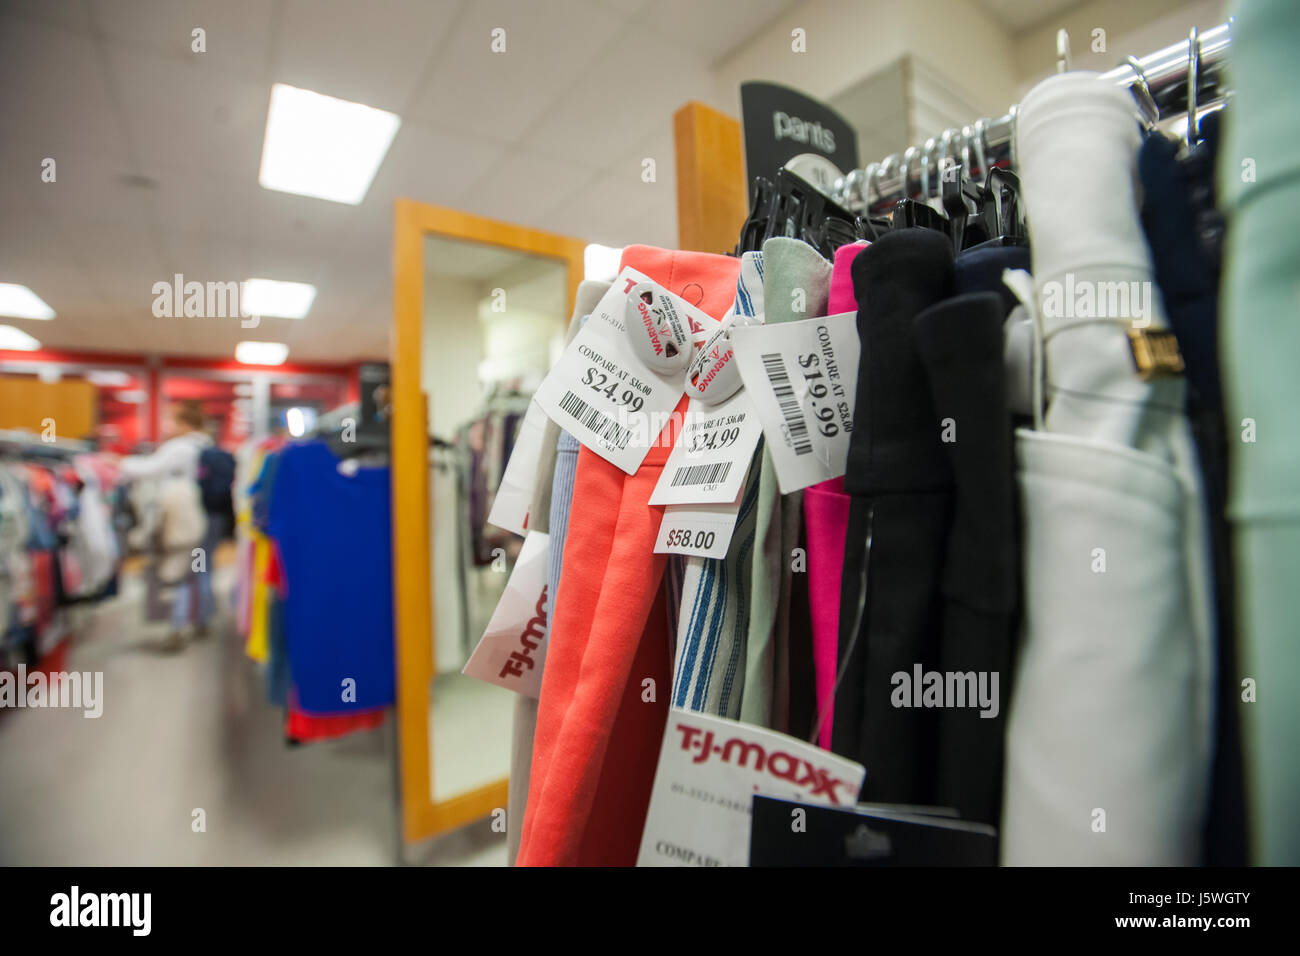 T.J. Maxx store in Lower Manhattan in New York on Monday, May 15, 2017. The TJX Companies is scheduled to release first-quarter earnings before the bell on Tuesday.  (© Richard B. Levine) Stock Photo